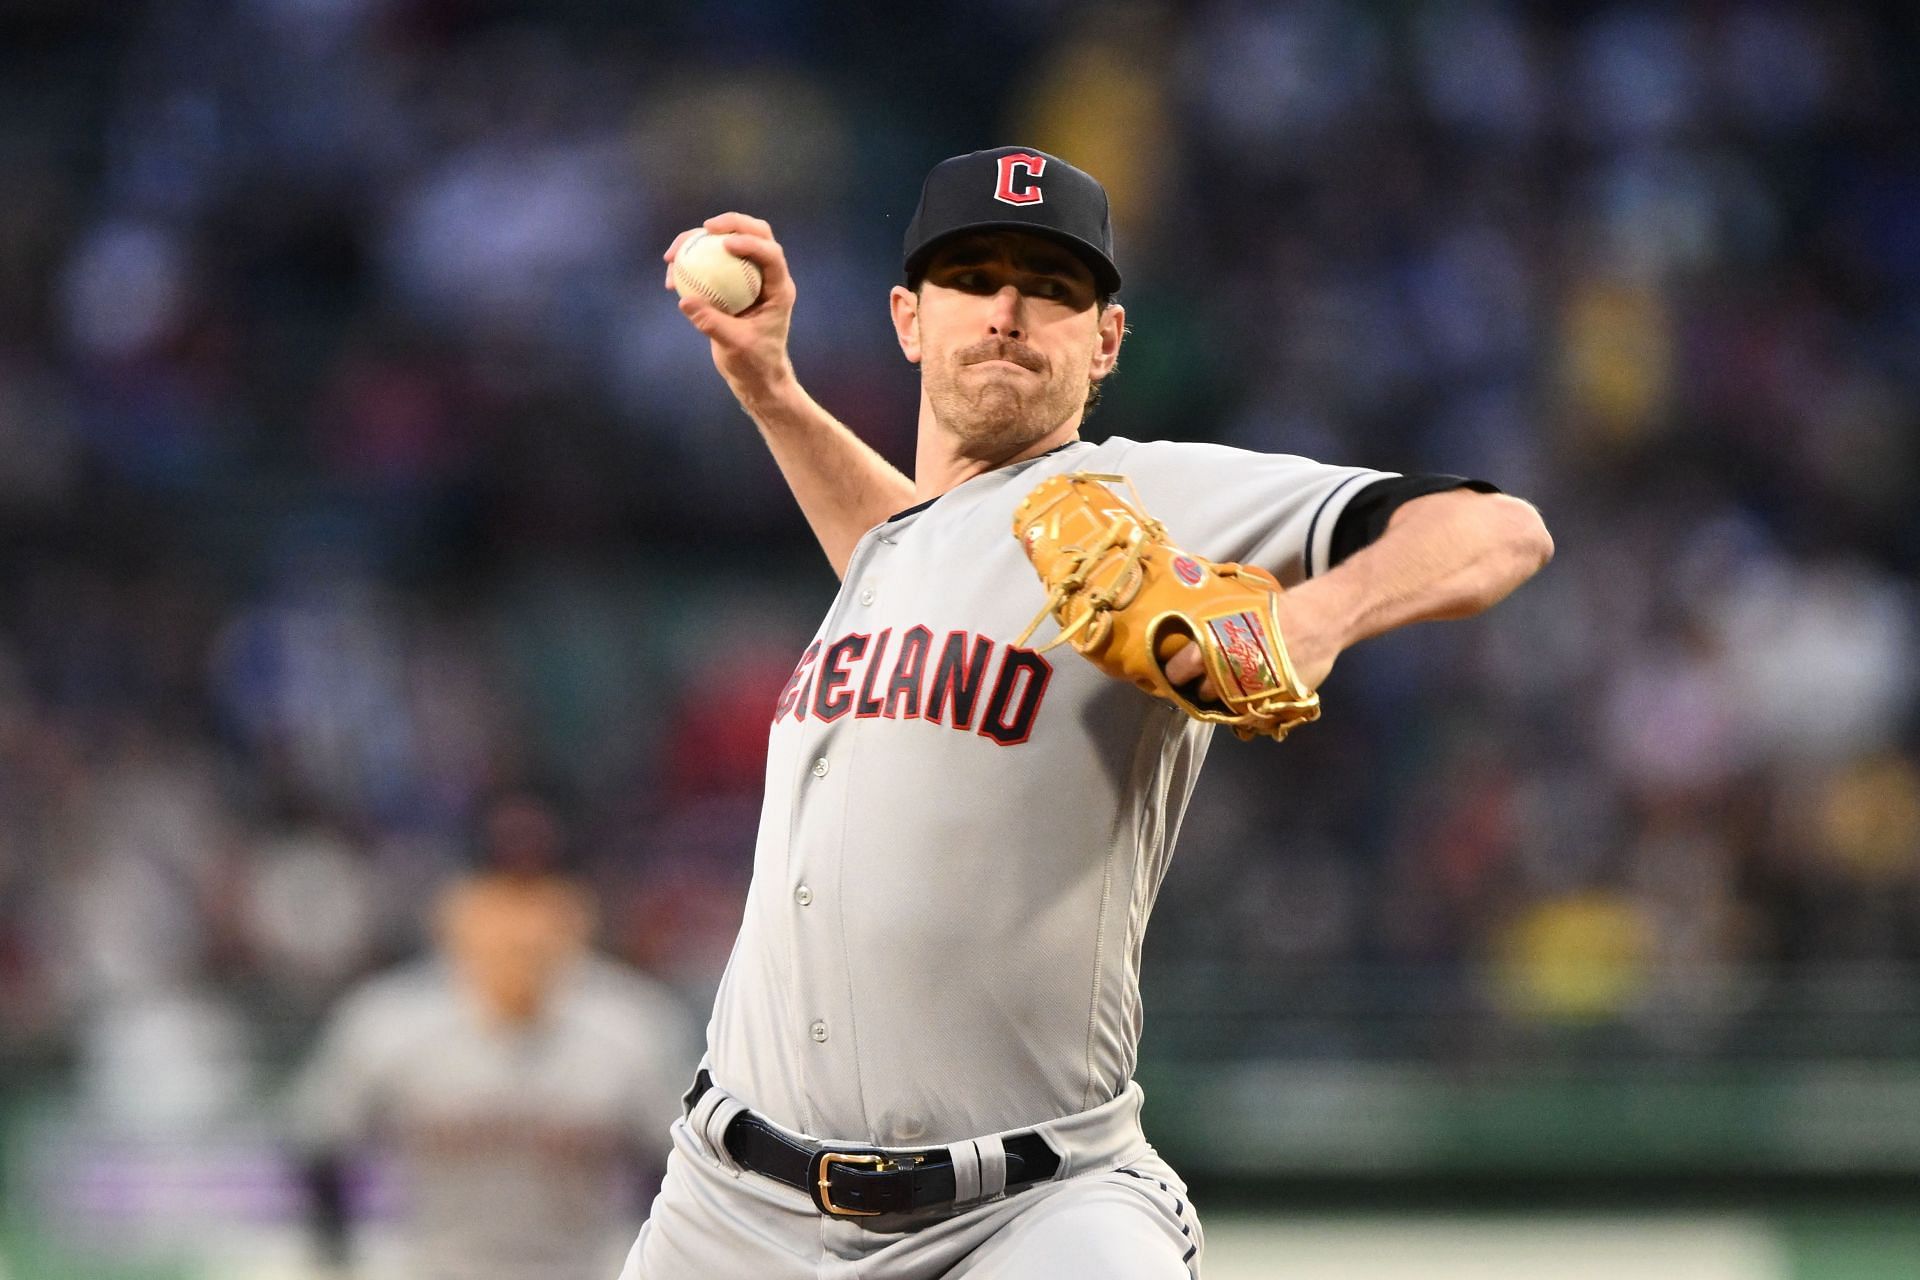 Shane Bieber of the Cleveland Guardians pitches against the Boston Red Sox at Fenway Park